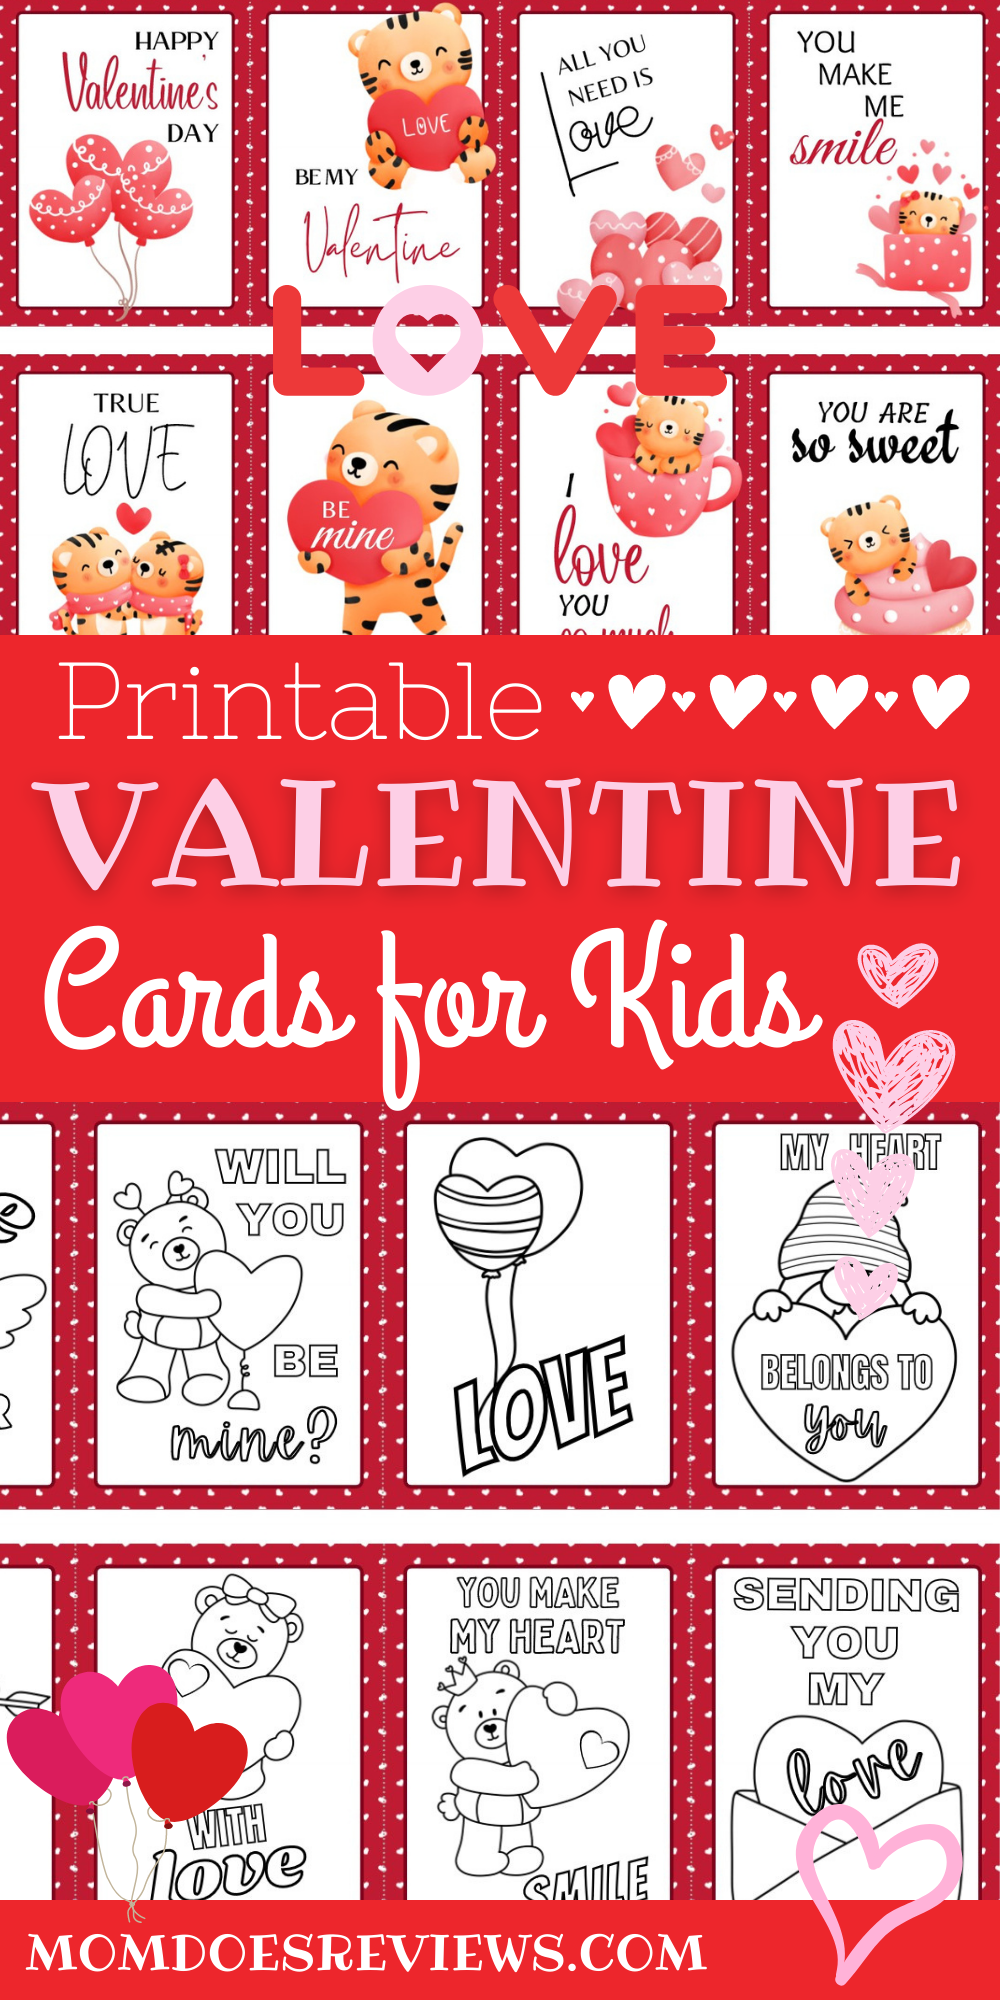 Printable & Customizable Valentine's Day Cards for Kids!